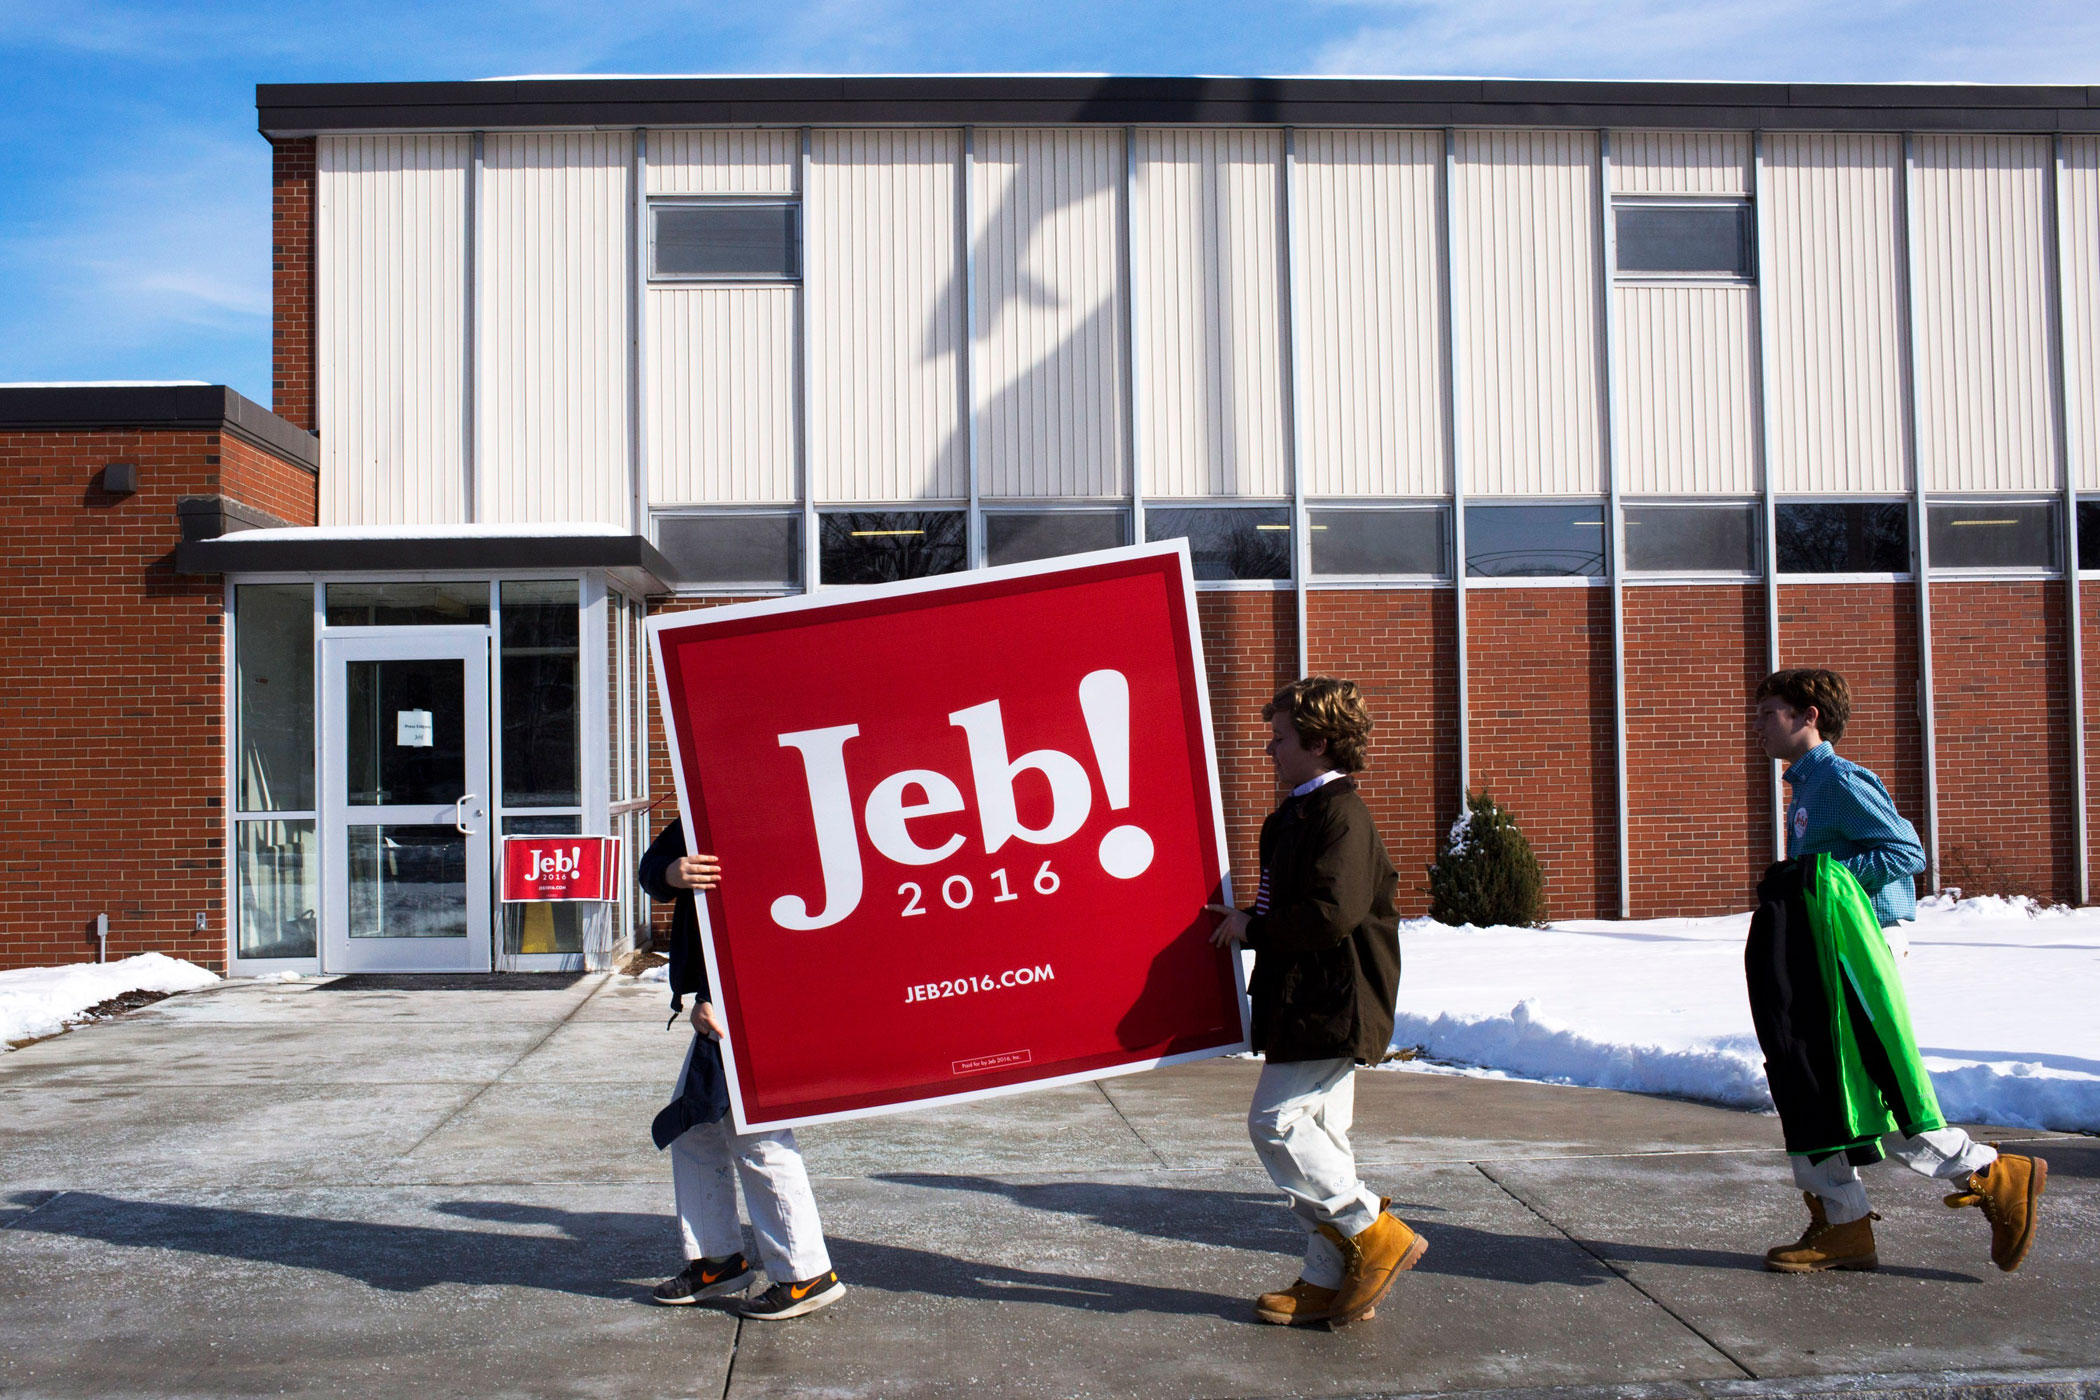 Supporters of Republican presidential candidate Jeb Bush attend a town hall event at the McKelvie Intermediate School in Bedford, N.H. on Feb. 6, 2016,